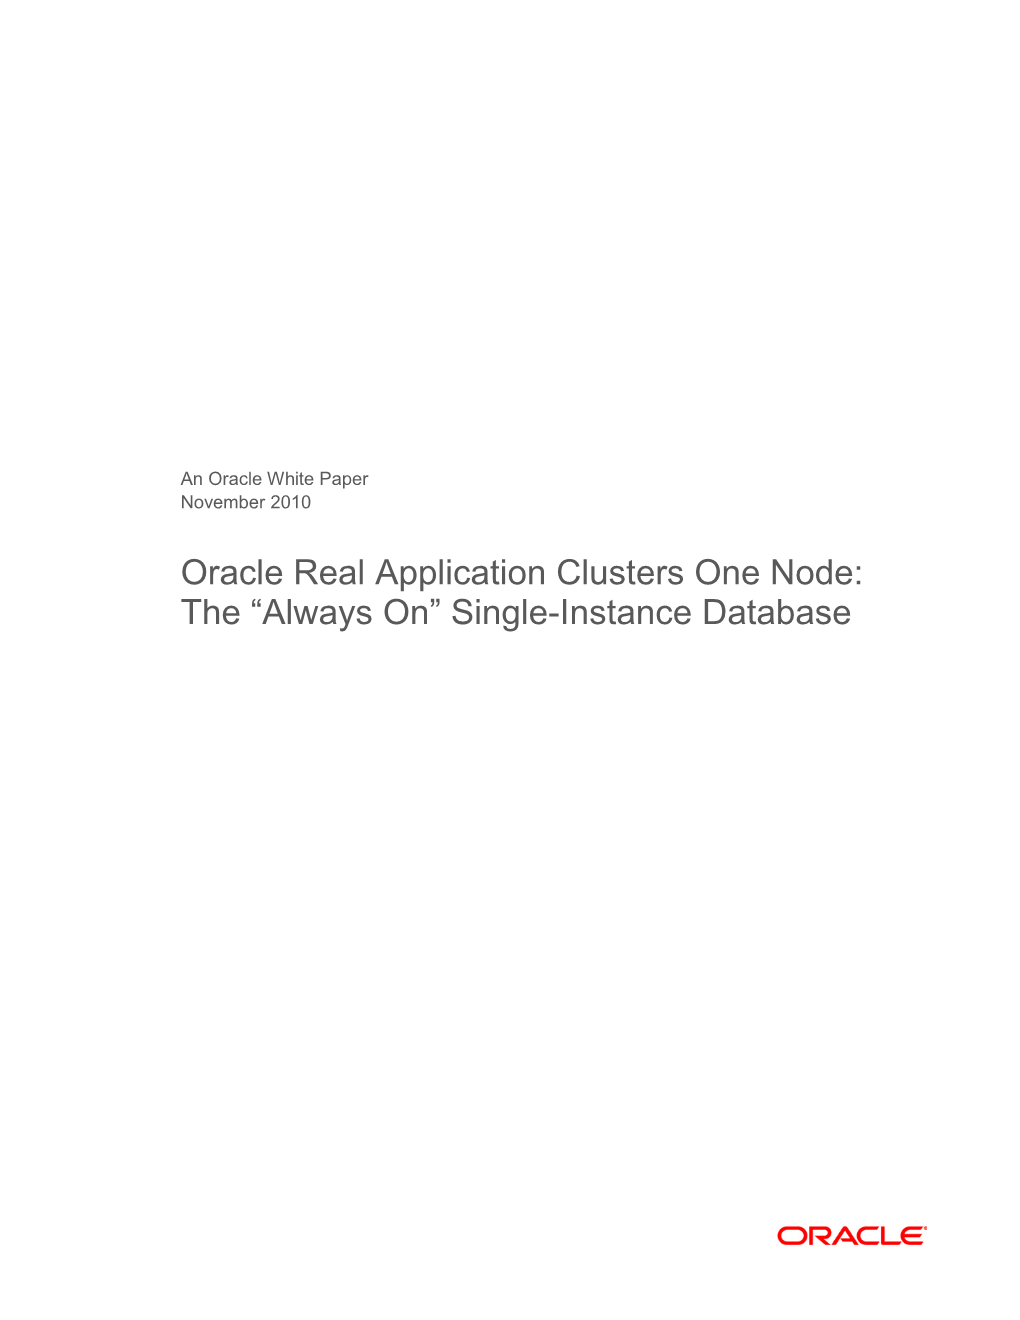 Oracle Real Application Clusters One Node:The “Always